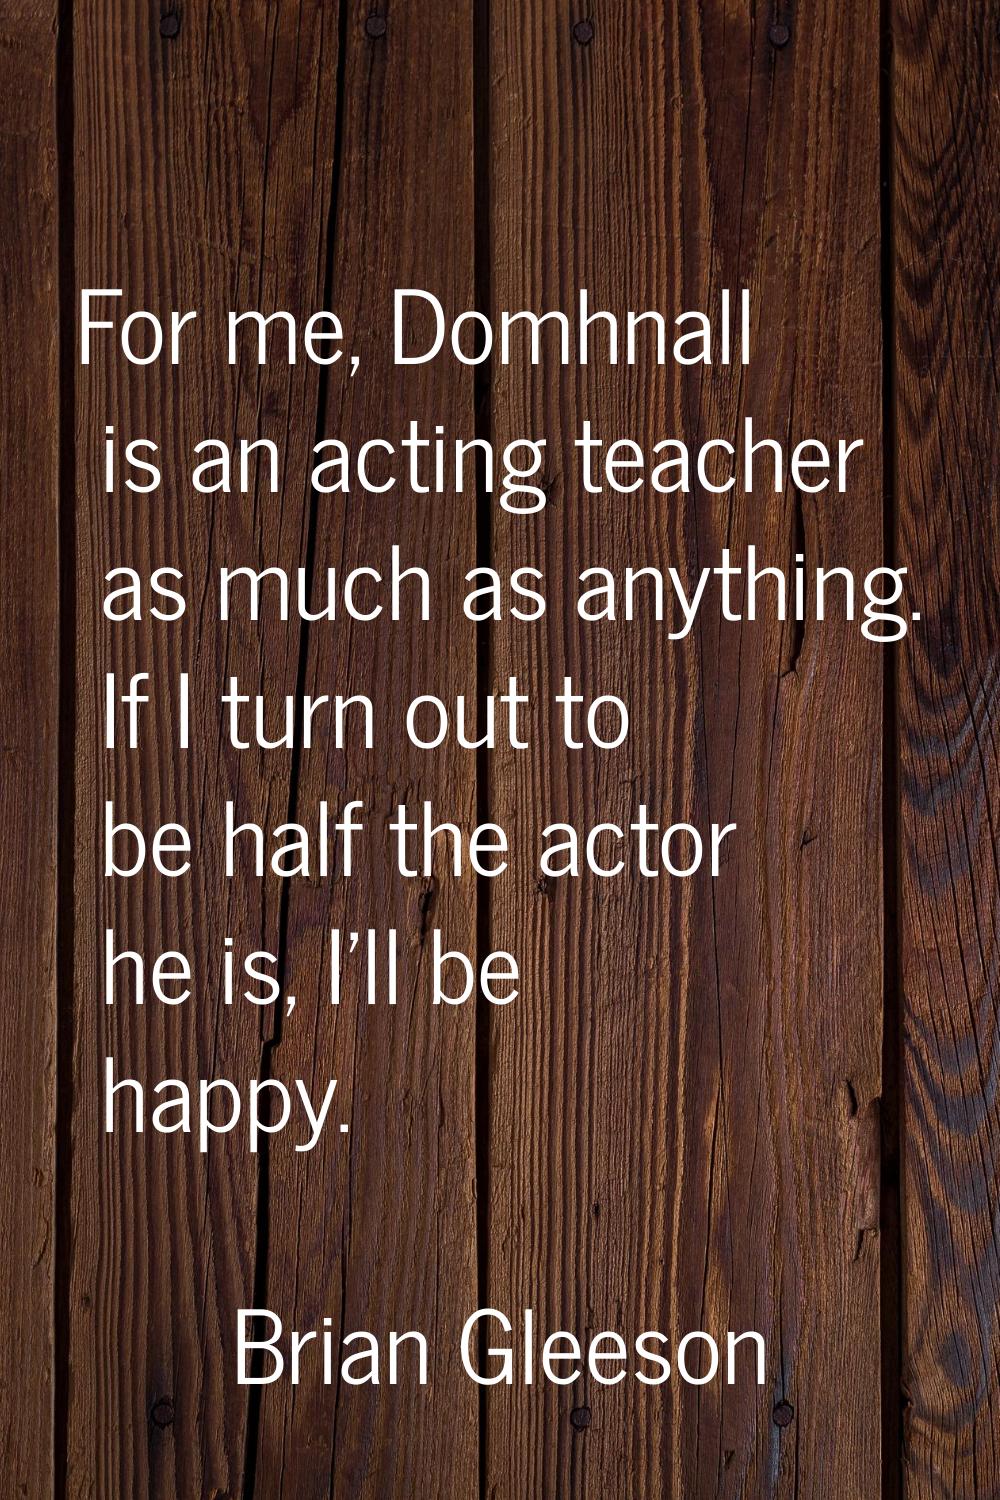 For me, Domhnall is an acting teacher as much as anything. If I turn out to be half the actor he is